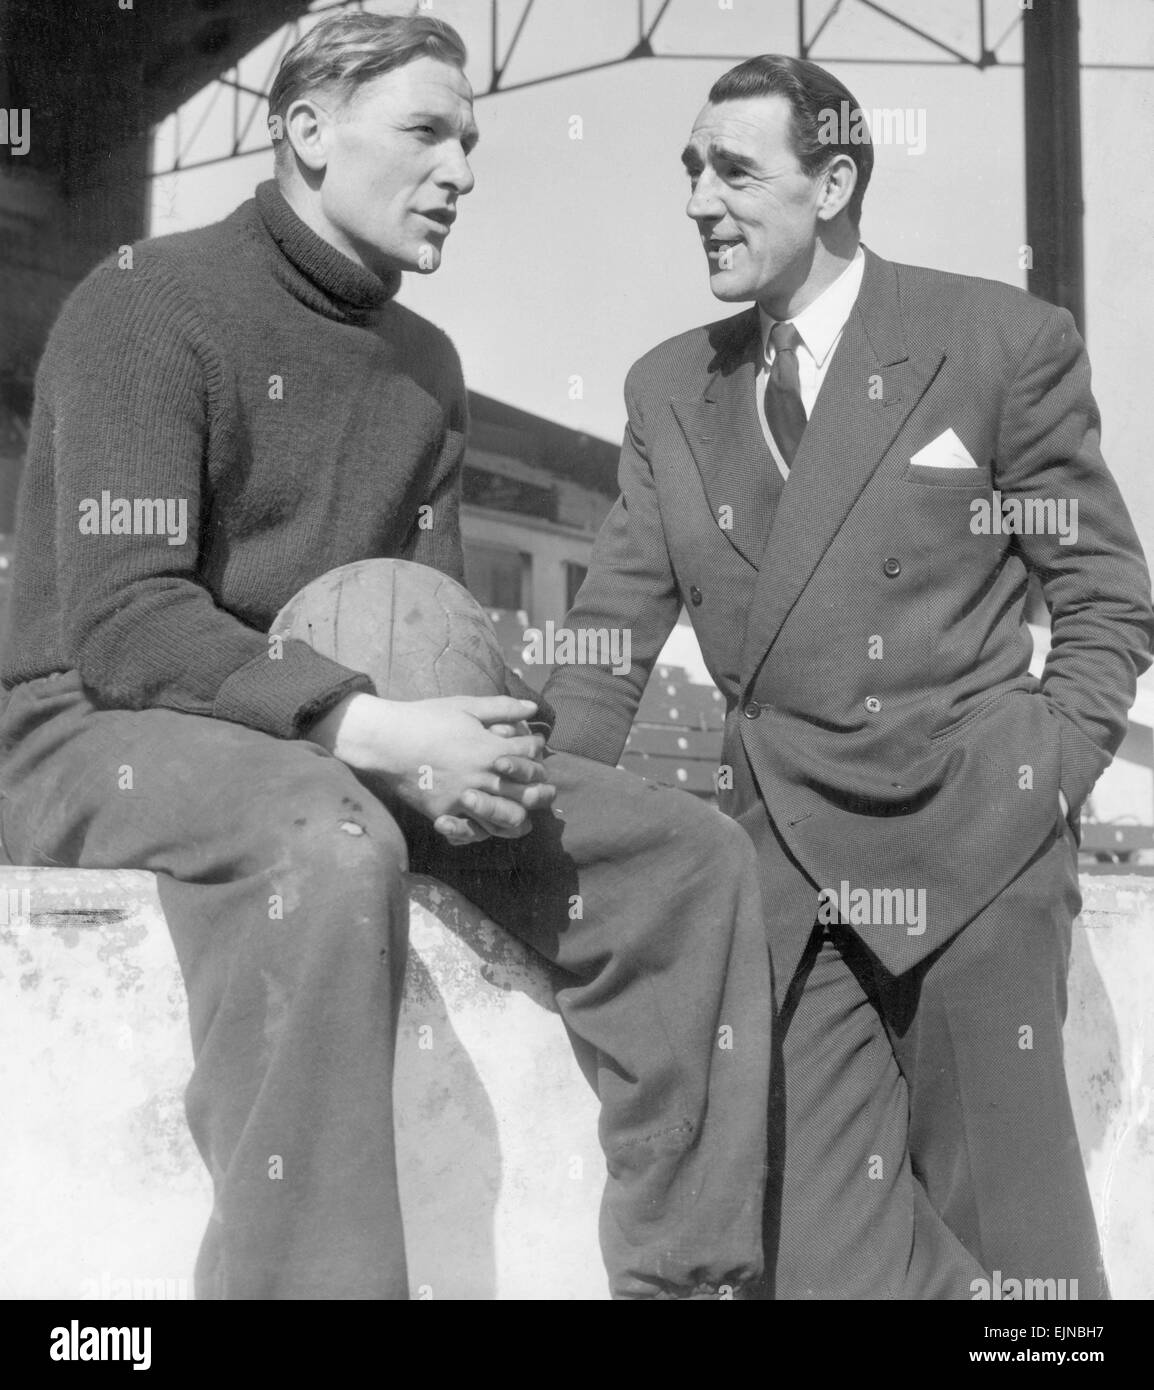 Frank Swift (Right) former Manchester Goalkeeper seen here talking with ...